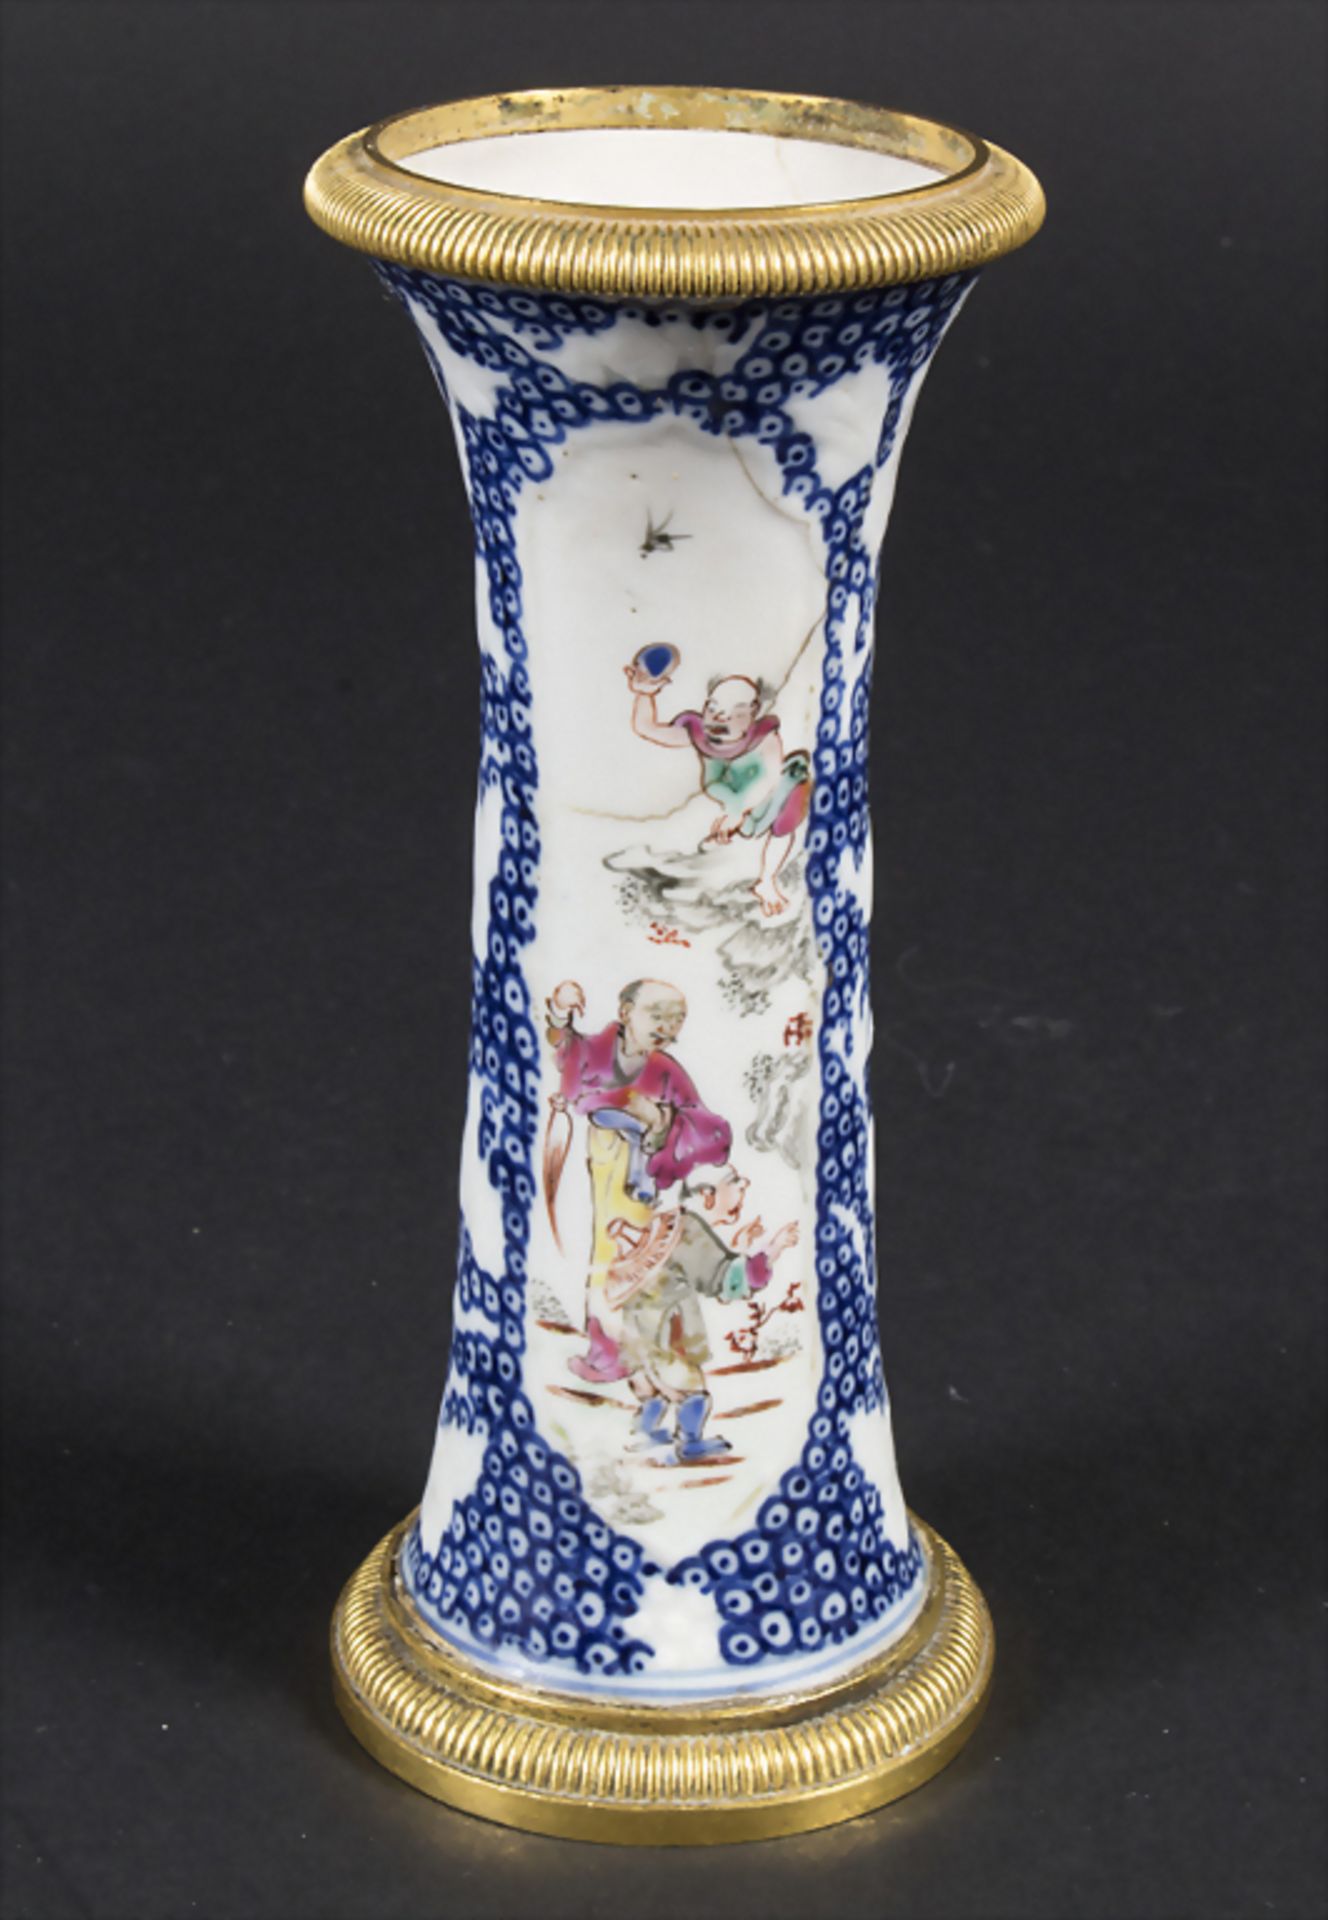 Ziervase / A decorative porcelain vase, China, Qing Dynastie (1644-1911), 18. Jh.Mater - Image 2 of 9